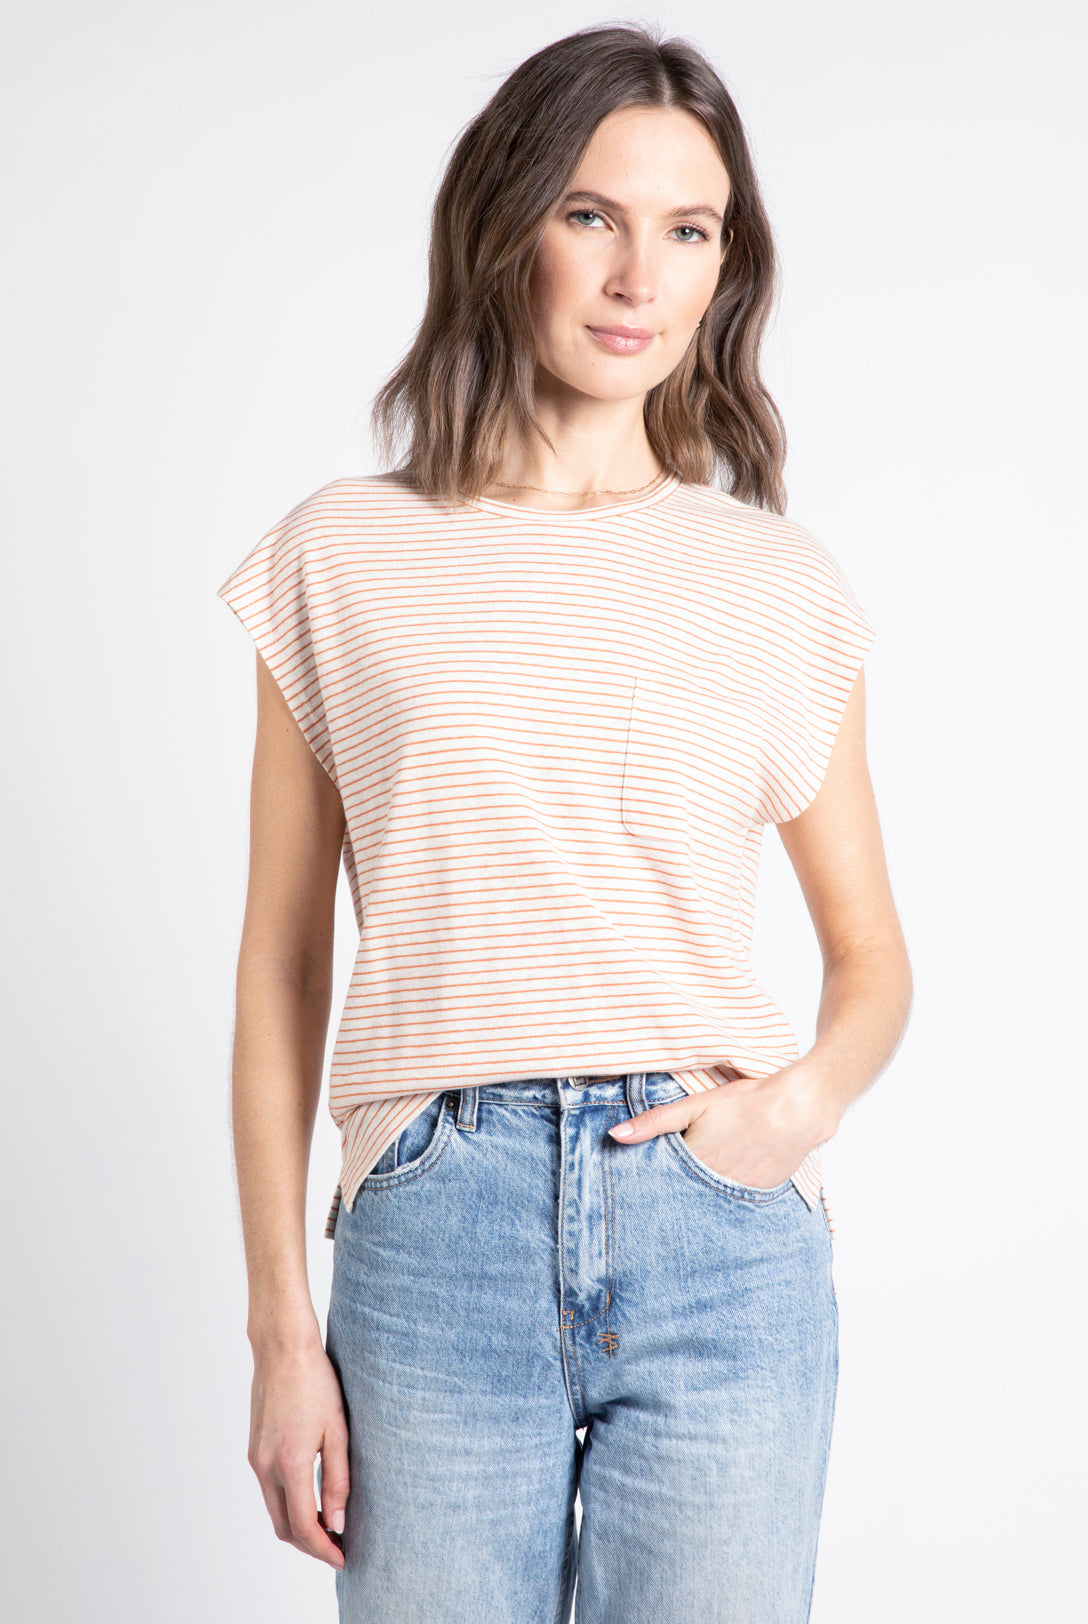 Off White/Sienna Striped Short Sleeve Top Apex Ethical Boutique